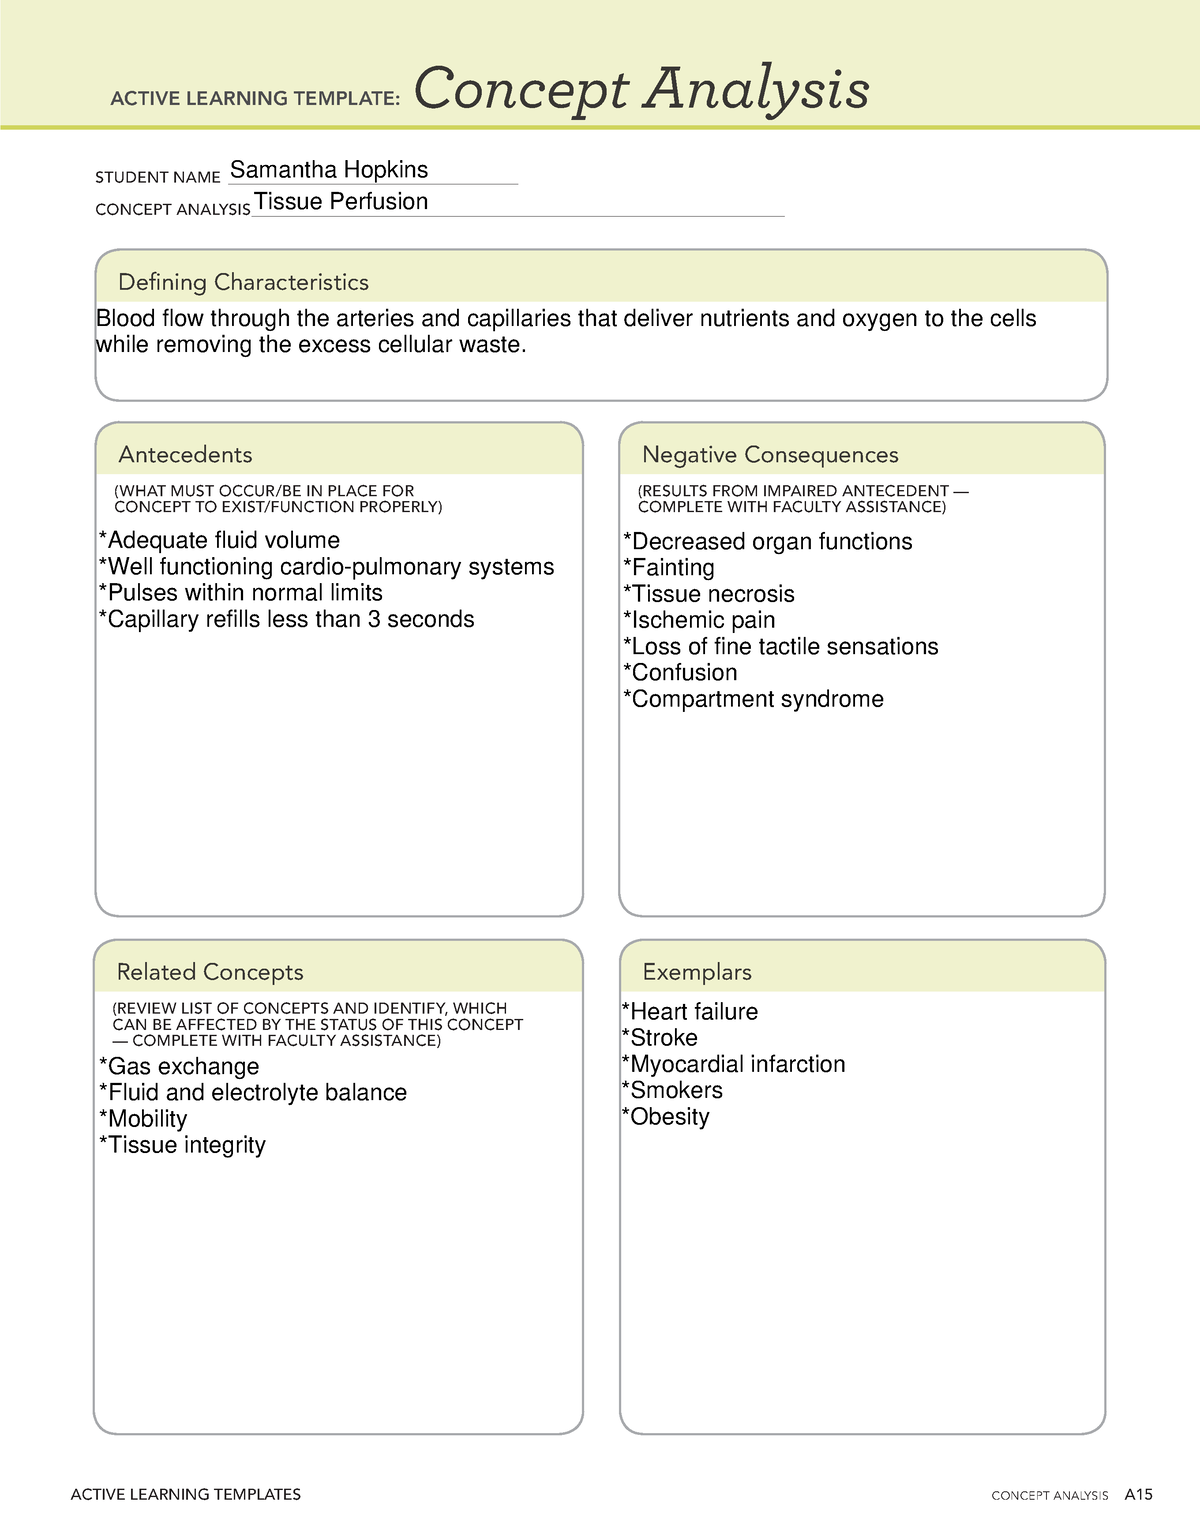 Concept Analysis 7 ACTIVE LEARNING TEMPLATES CONCEPT ANALYSIS A Concept Analysis STUDENT NAME